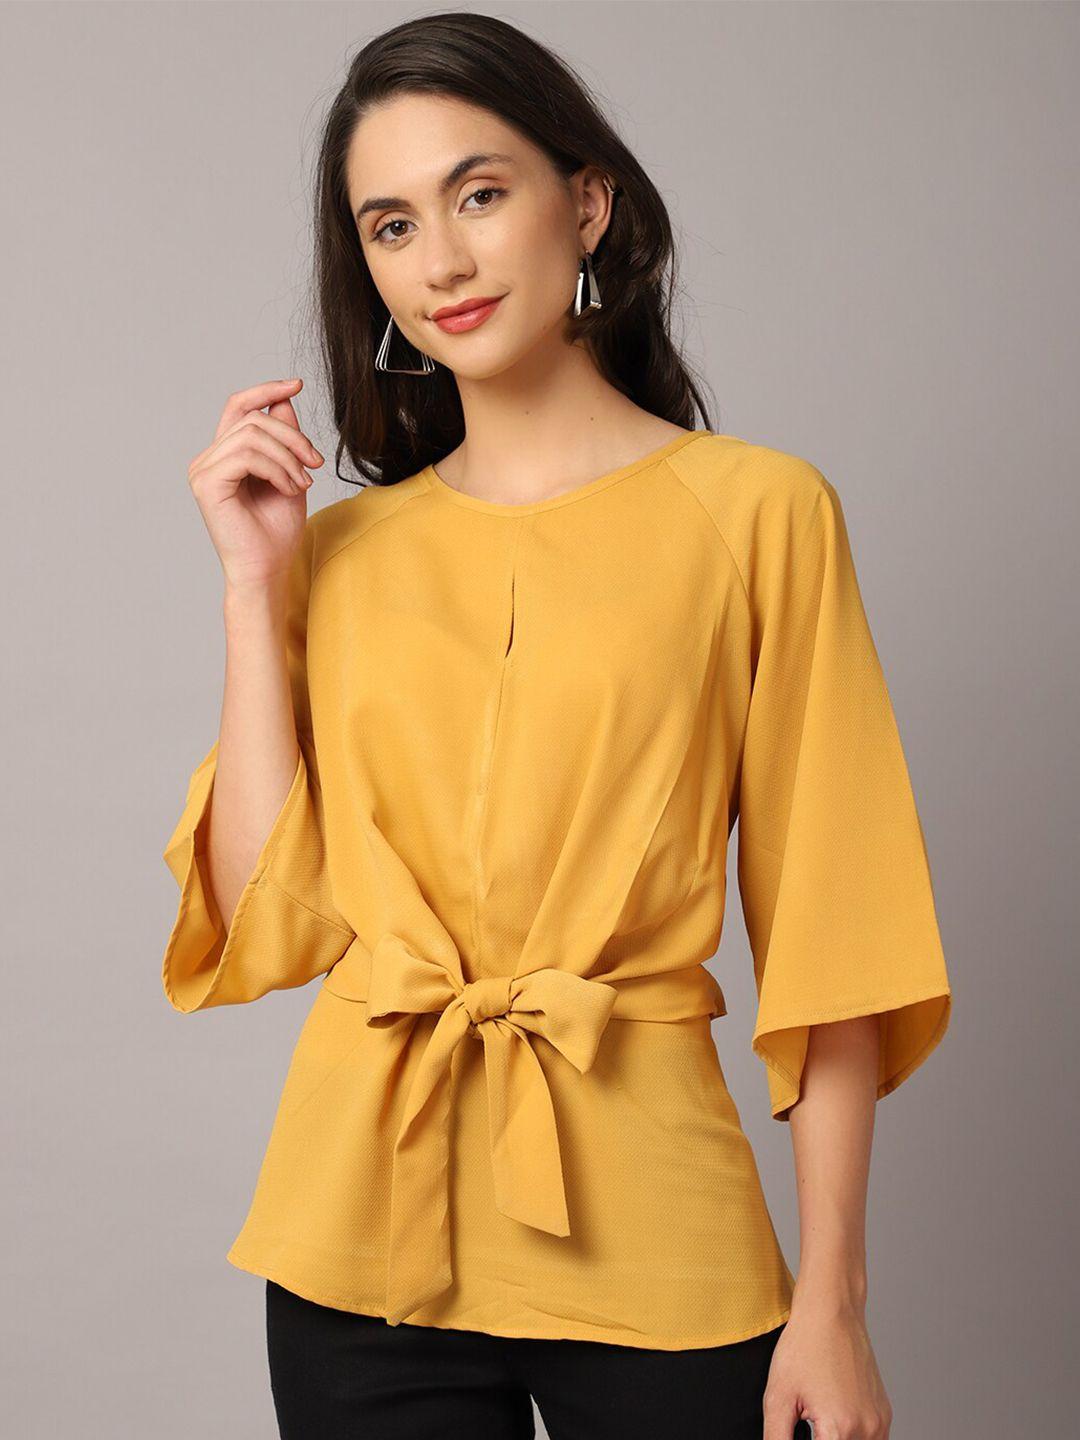 crozo by cantabil mustard yellow cinched waist top